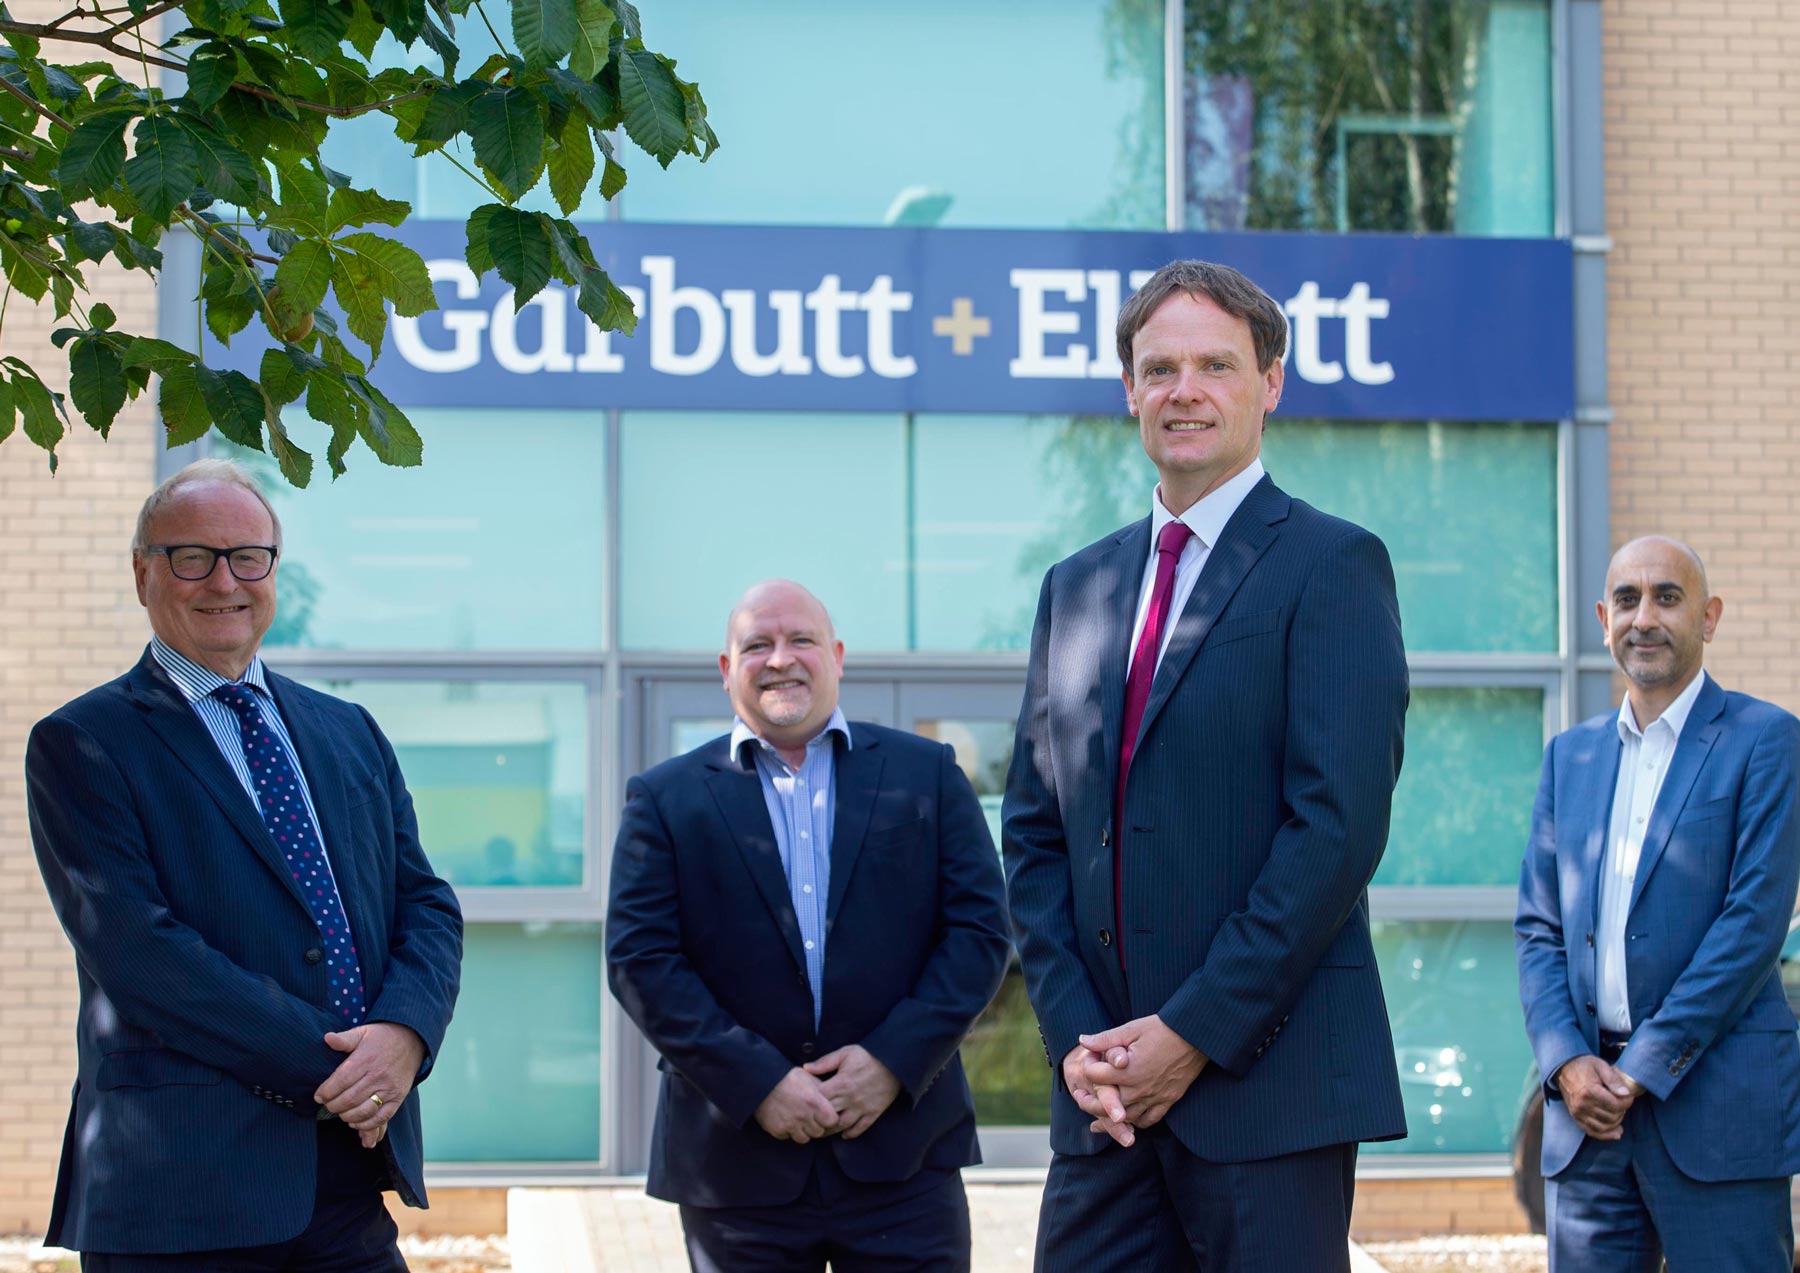 REEFSUCCESS: Pictured (L to R) are head of the Garbutt + Elliott corporate finance team, partner, Tony Farmer; managing partner, Russell Turner and corporate finance partners, Rob Burton and Tariq Javaid, outside the firm’s headquarters in York.